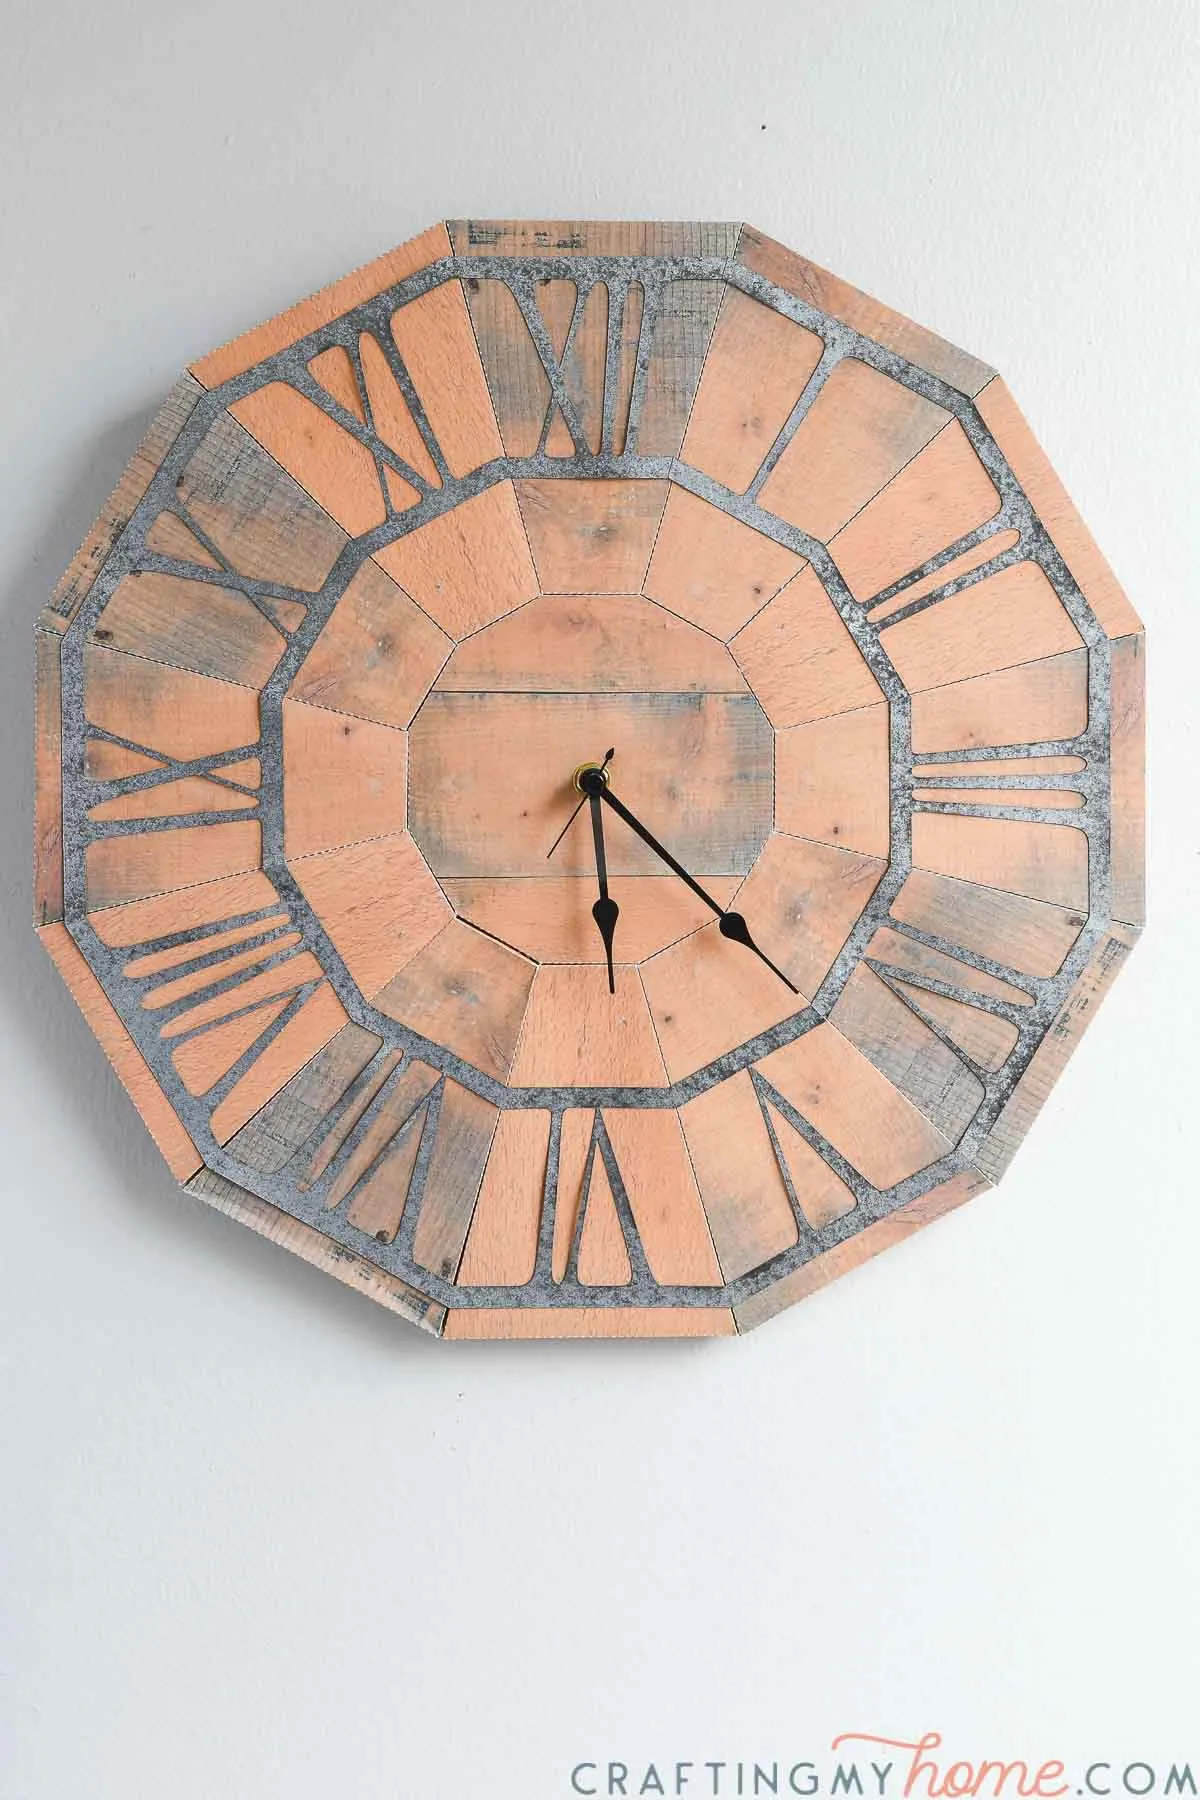 The completed pallet wood wall clock made from paper on the wall. 